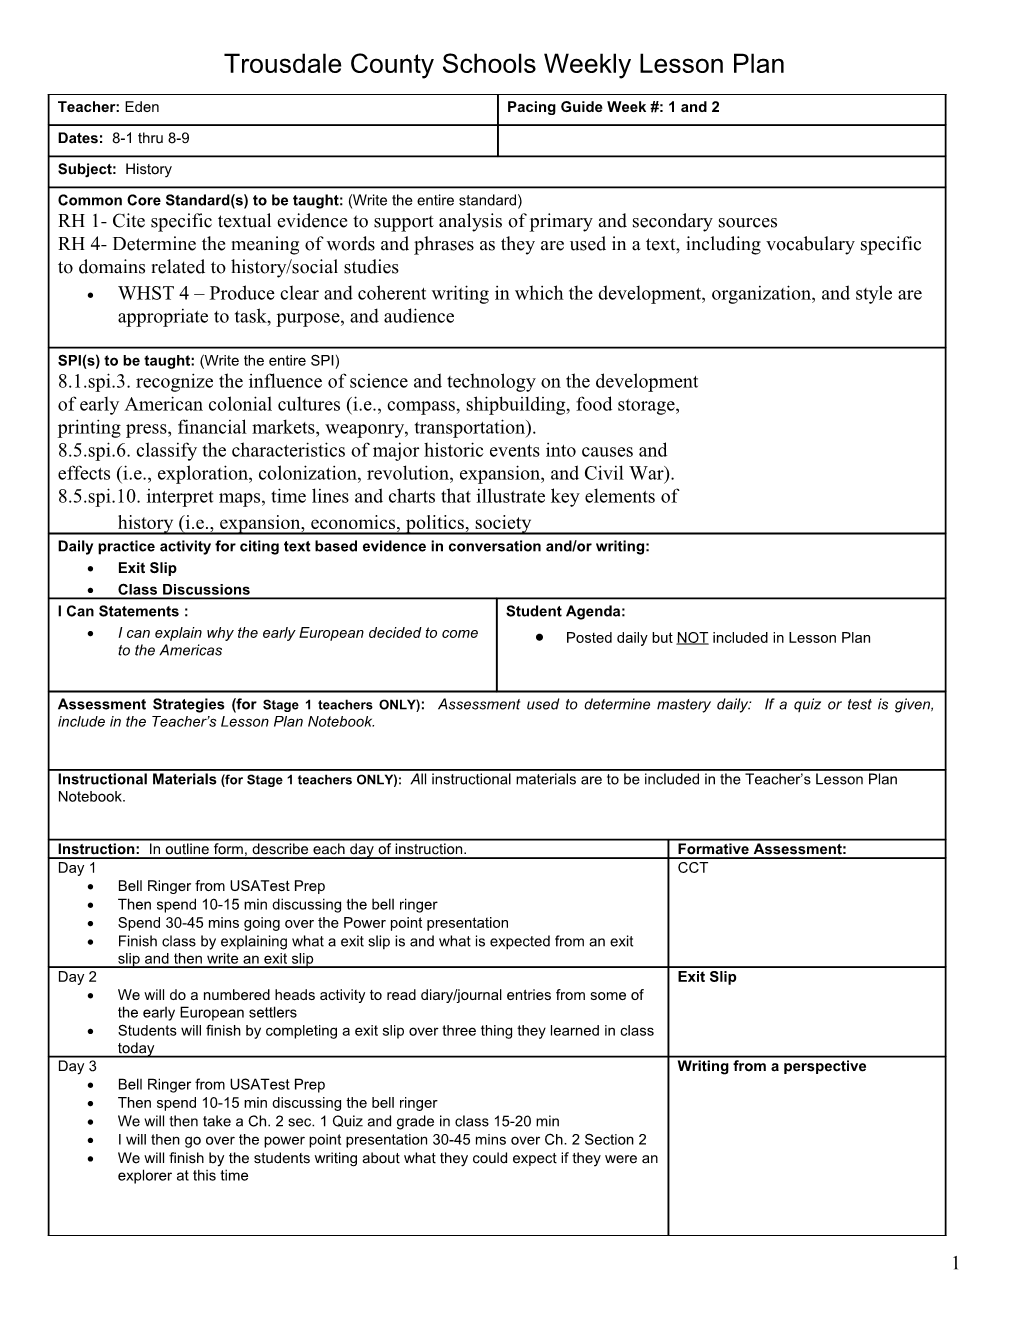 Lesson Plan Template s5